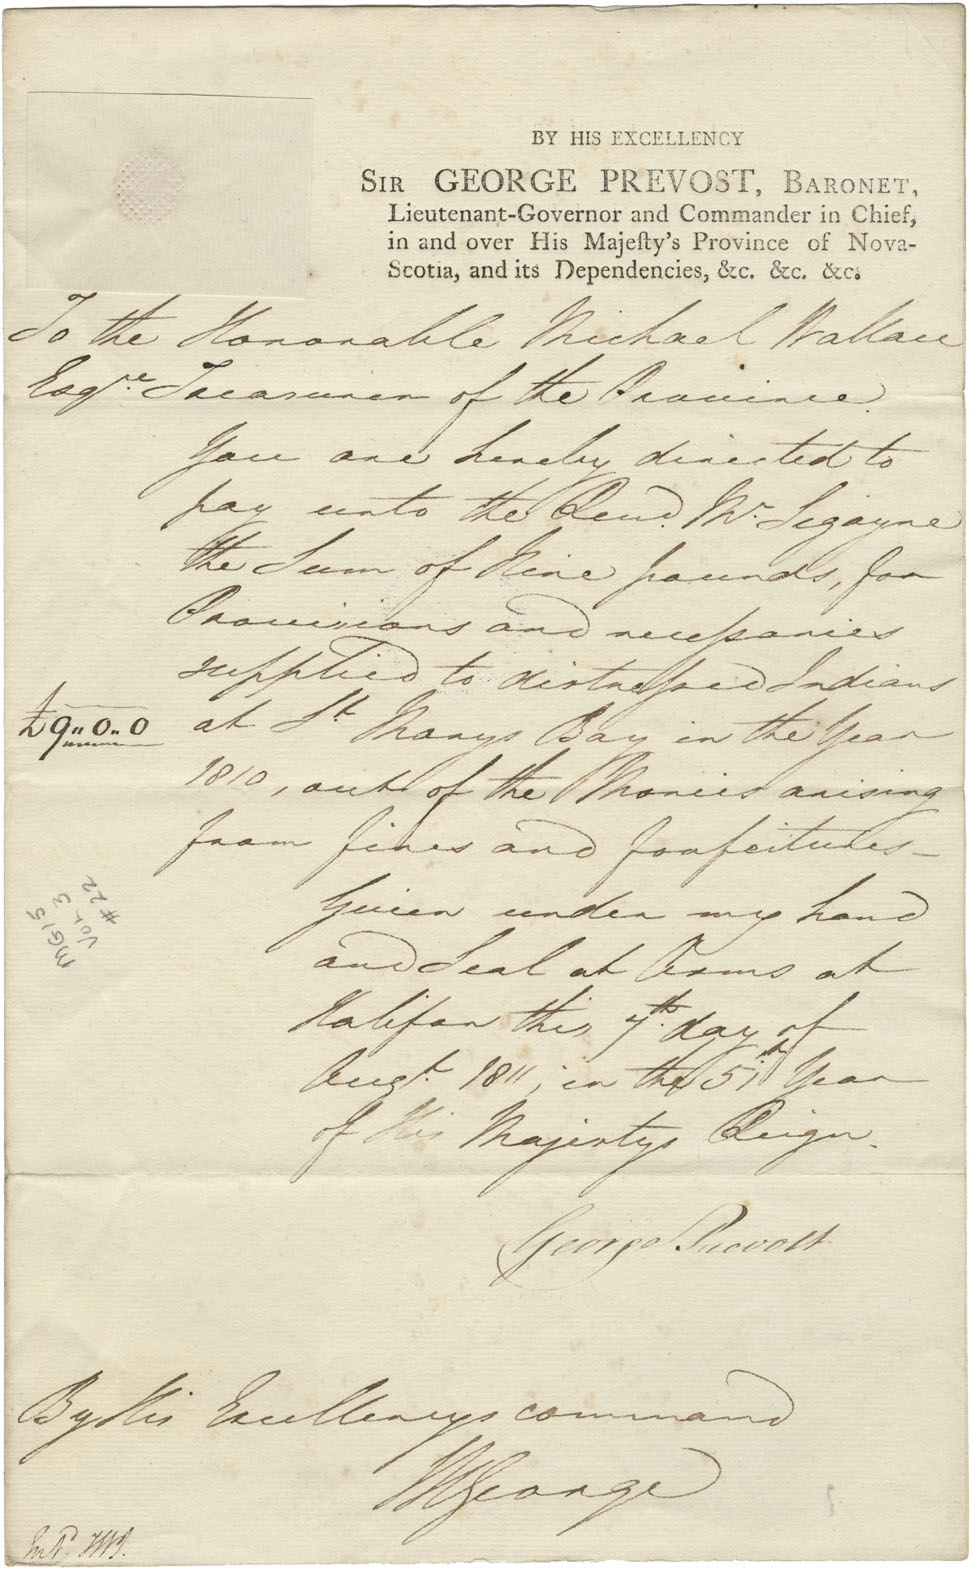 Sir George Prevost orders Michael Wallace, Provincial Treasurer, to send £9-0-0 to Rev. Mr. Sigogne, for provisions and necessities supplied to distressed Mi'kmaq.